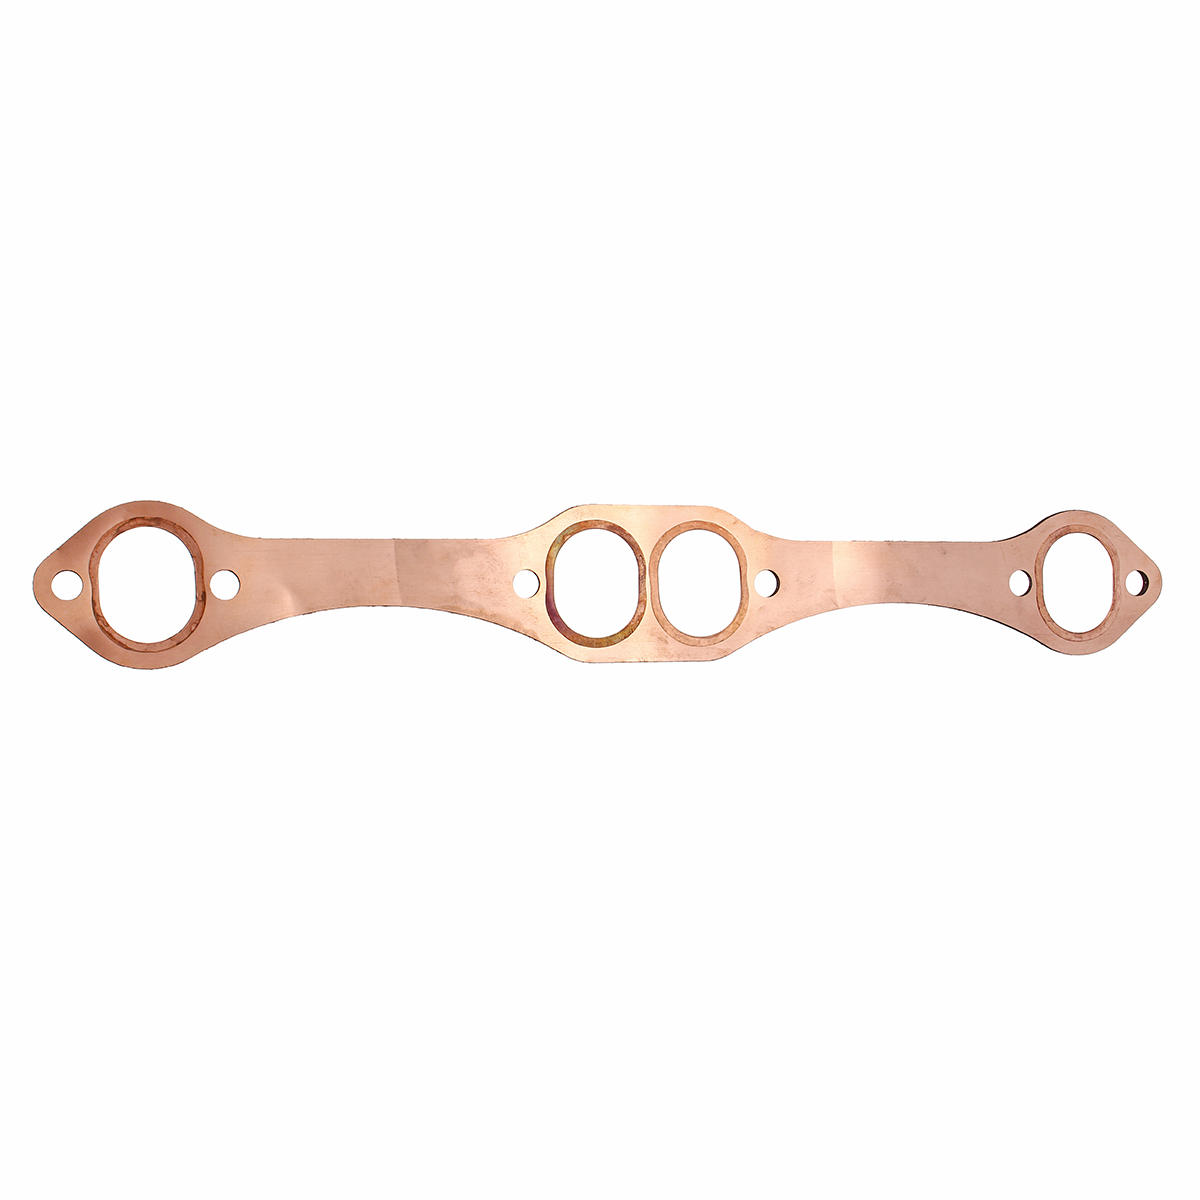 SBC-Oval-Port-Copper-Header-Exhaust-Seal-Gasket-For-SB-Chevy-327-305-350-383-1560133